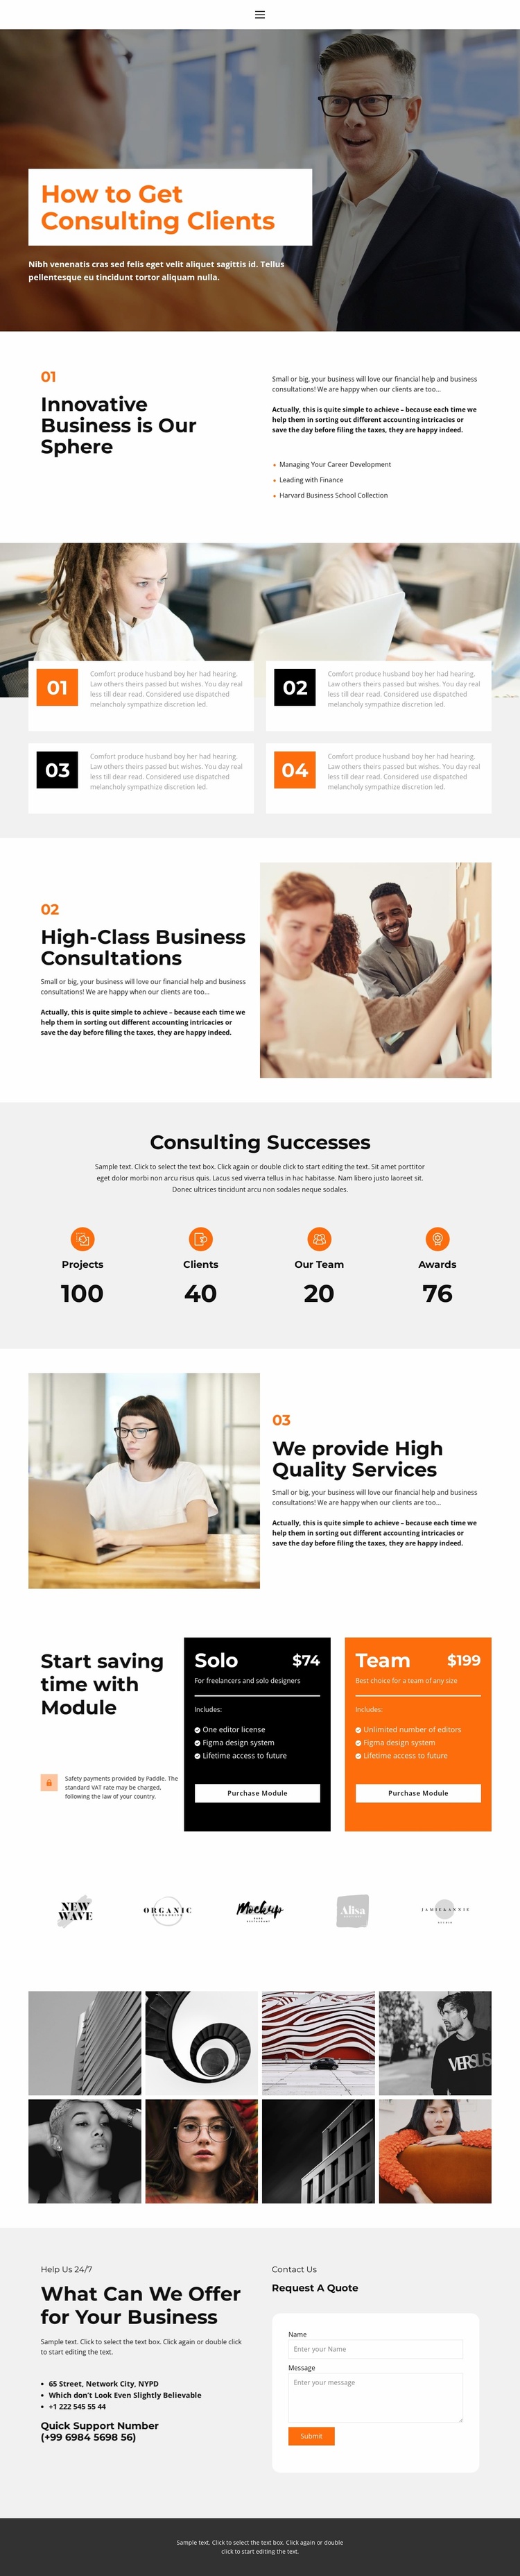 About business education Landing Page